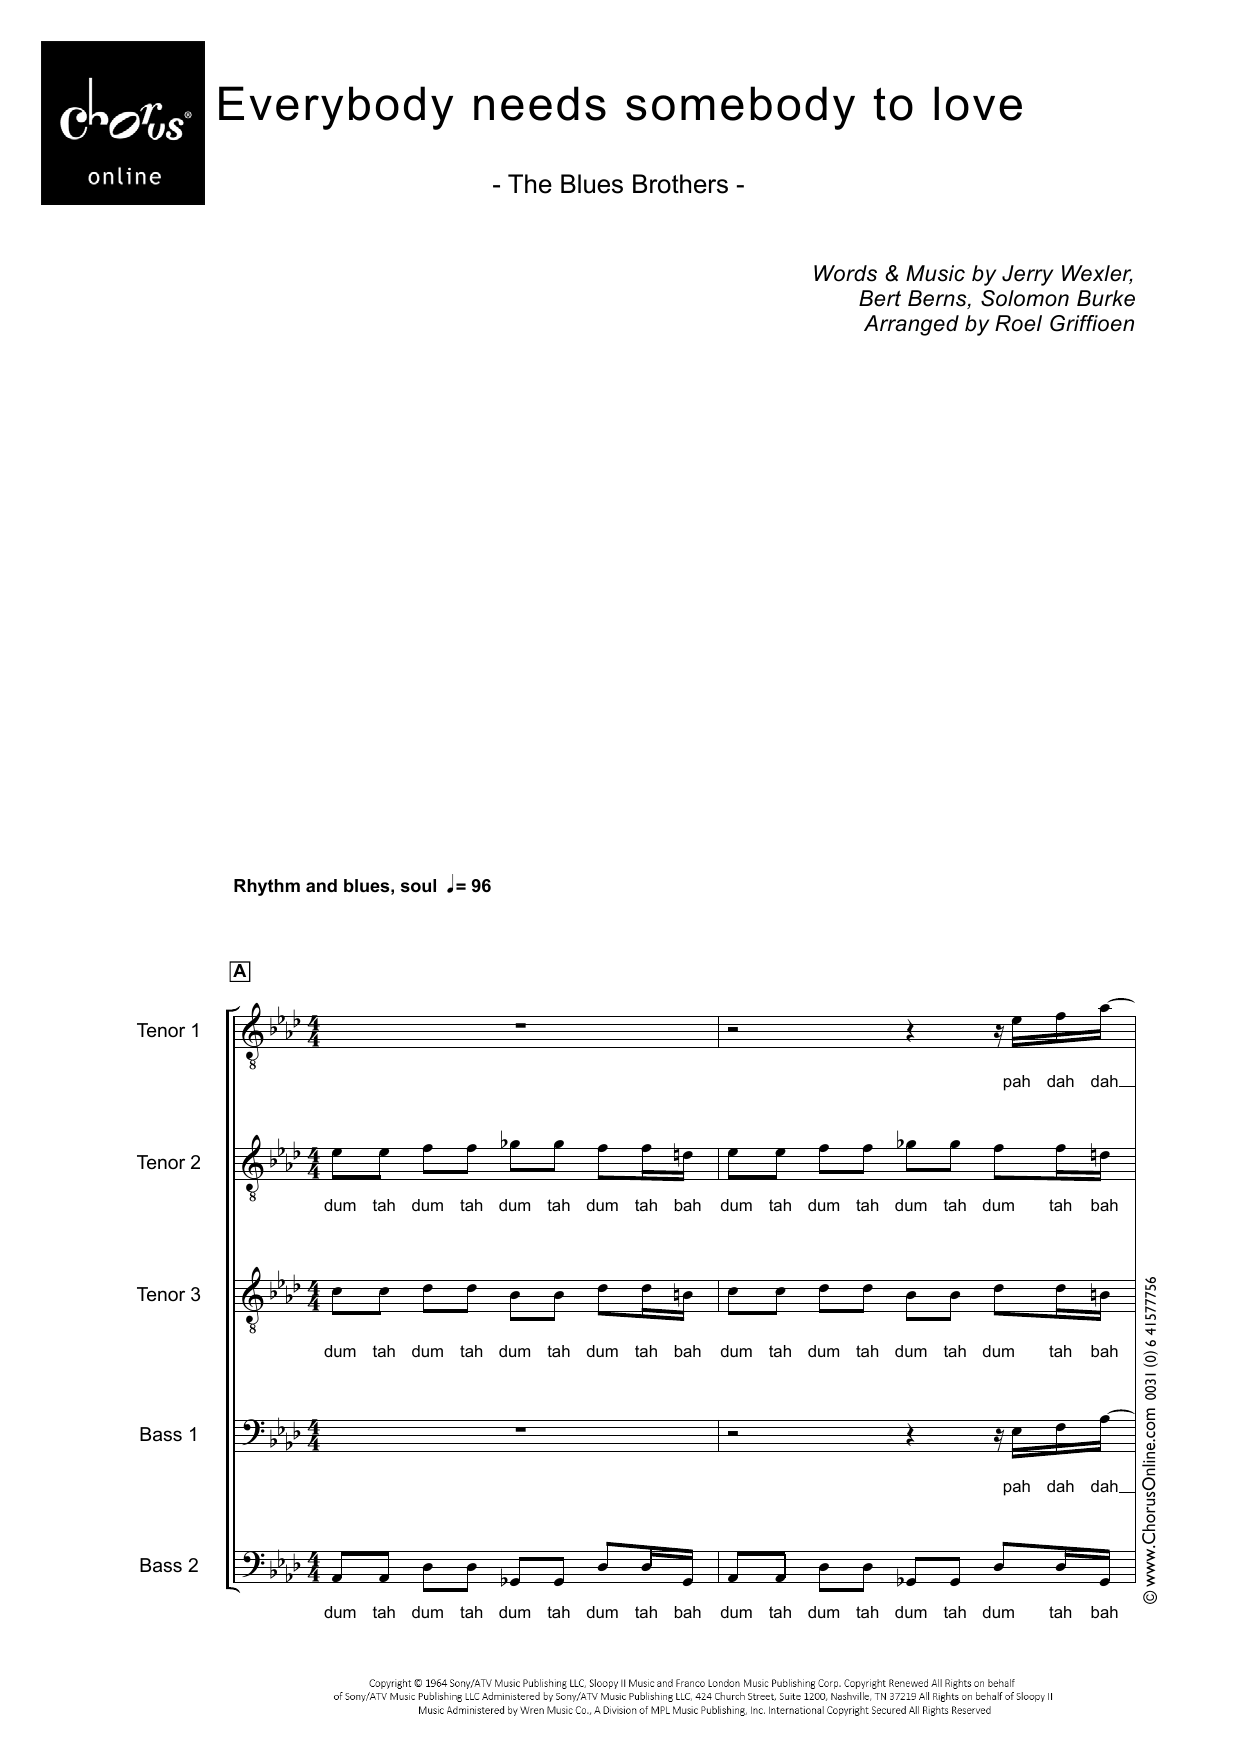 The Blues Brothers Everybody Needs Somebody to Love (arr. Roel Griffioen) sheet music notes printable PDF score